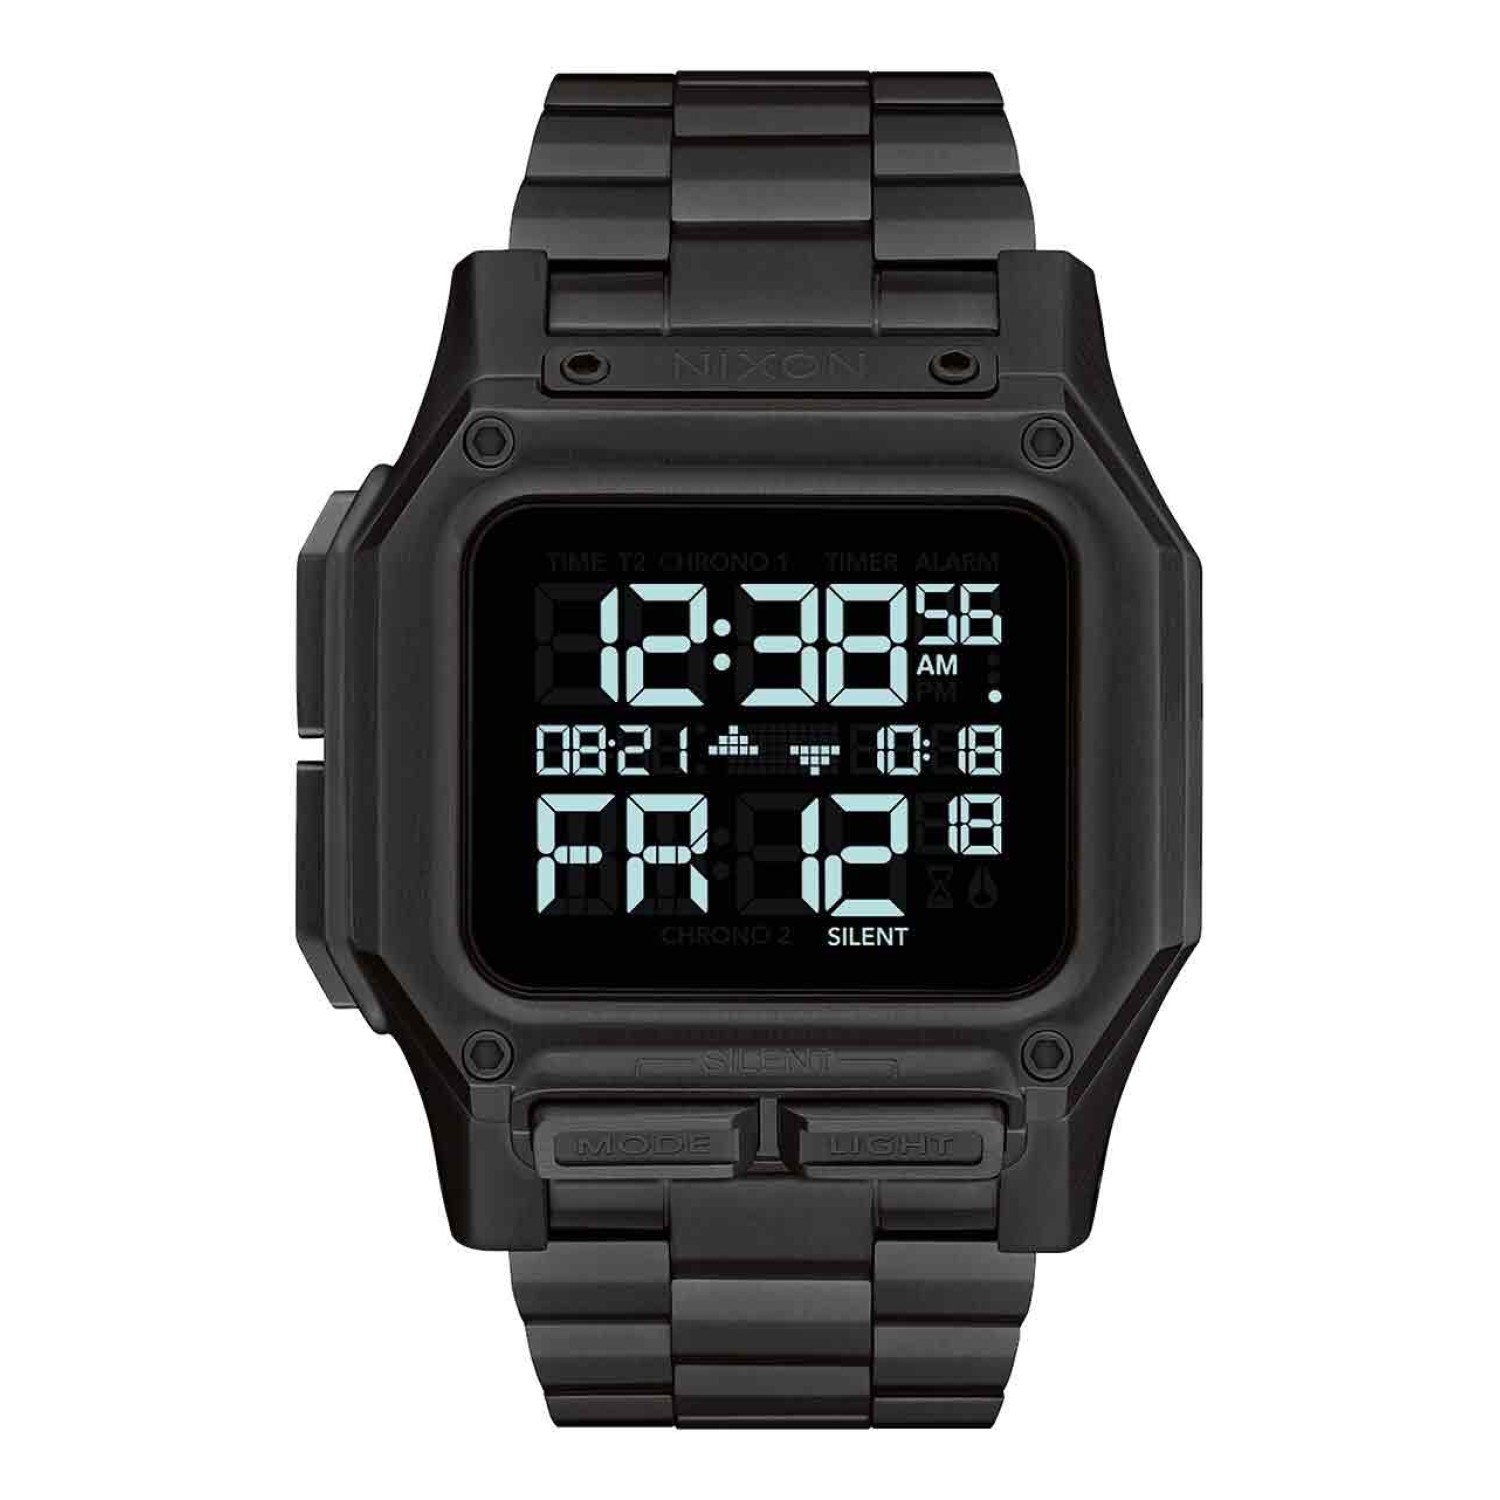 A1268-001-00 NIXON REGULUS All Black Stainless Steel Watch. Forged from stainless steel, enter a street-ready next gen of our bestseller Regulus watch. The new Regulus Stainless Steel blurs the lines between tactical ops and streetwear flash.Made to withs